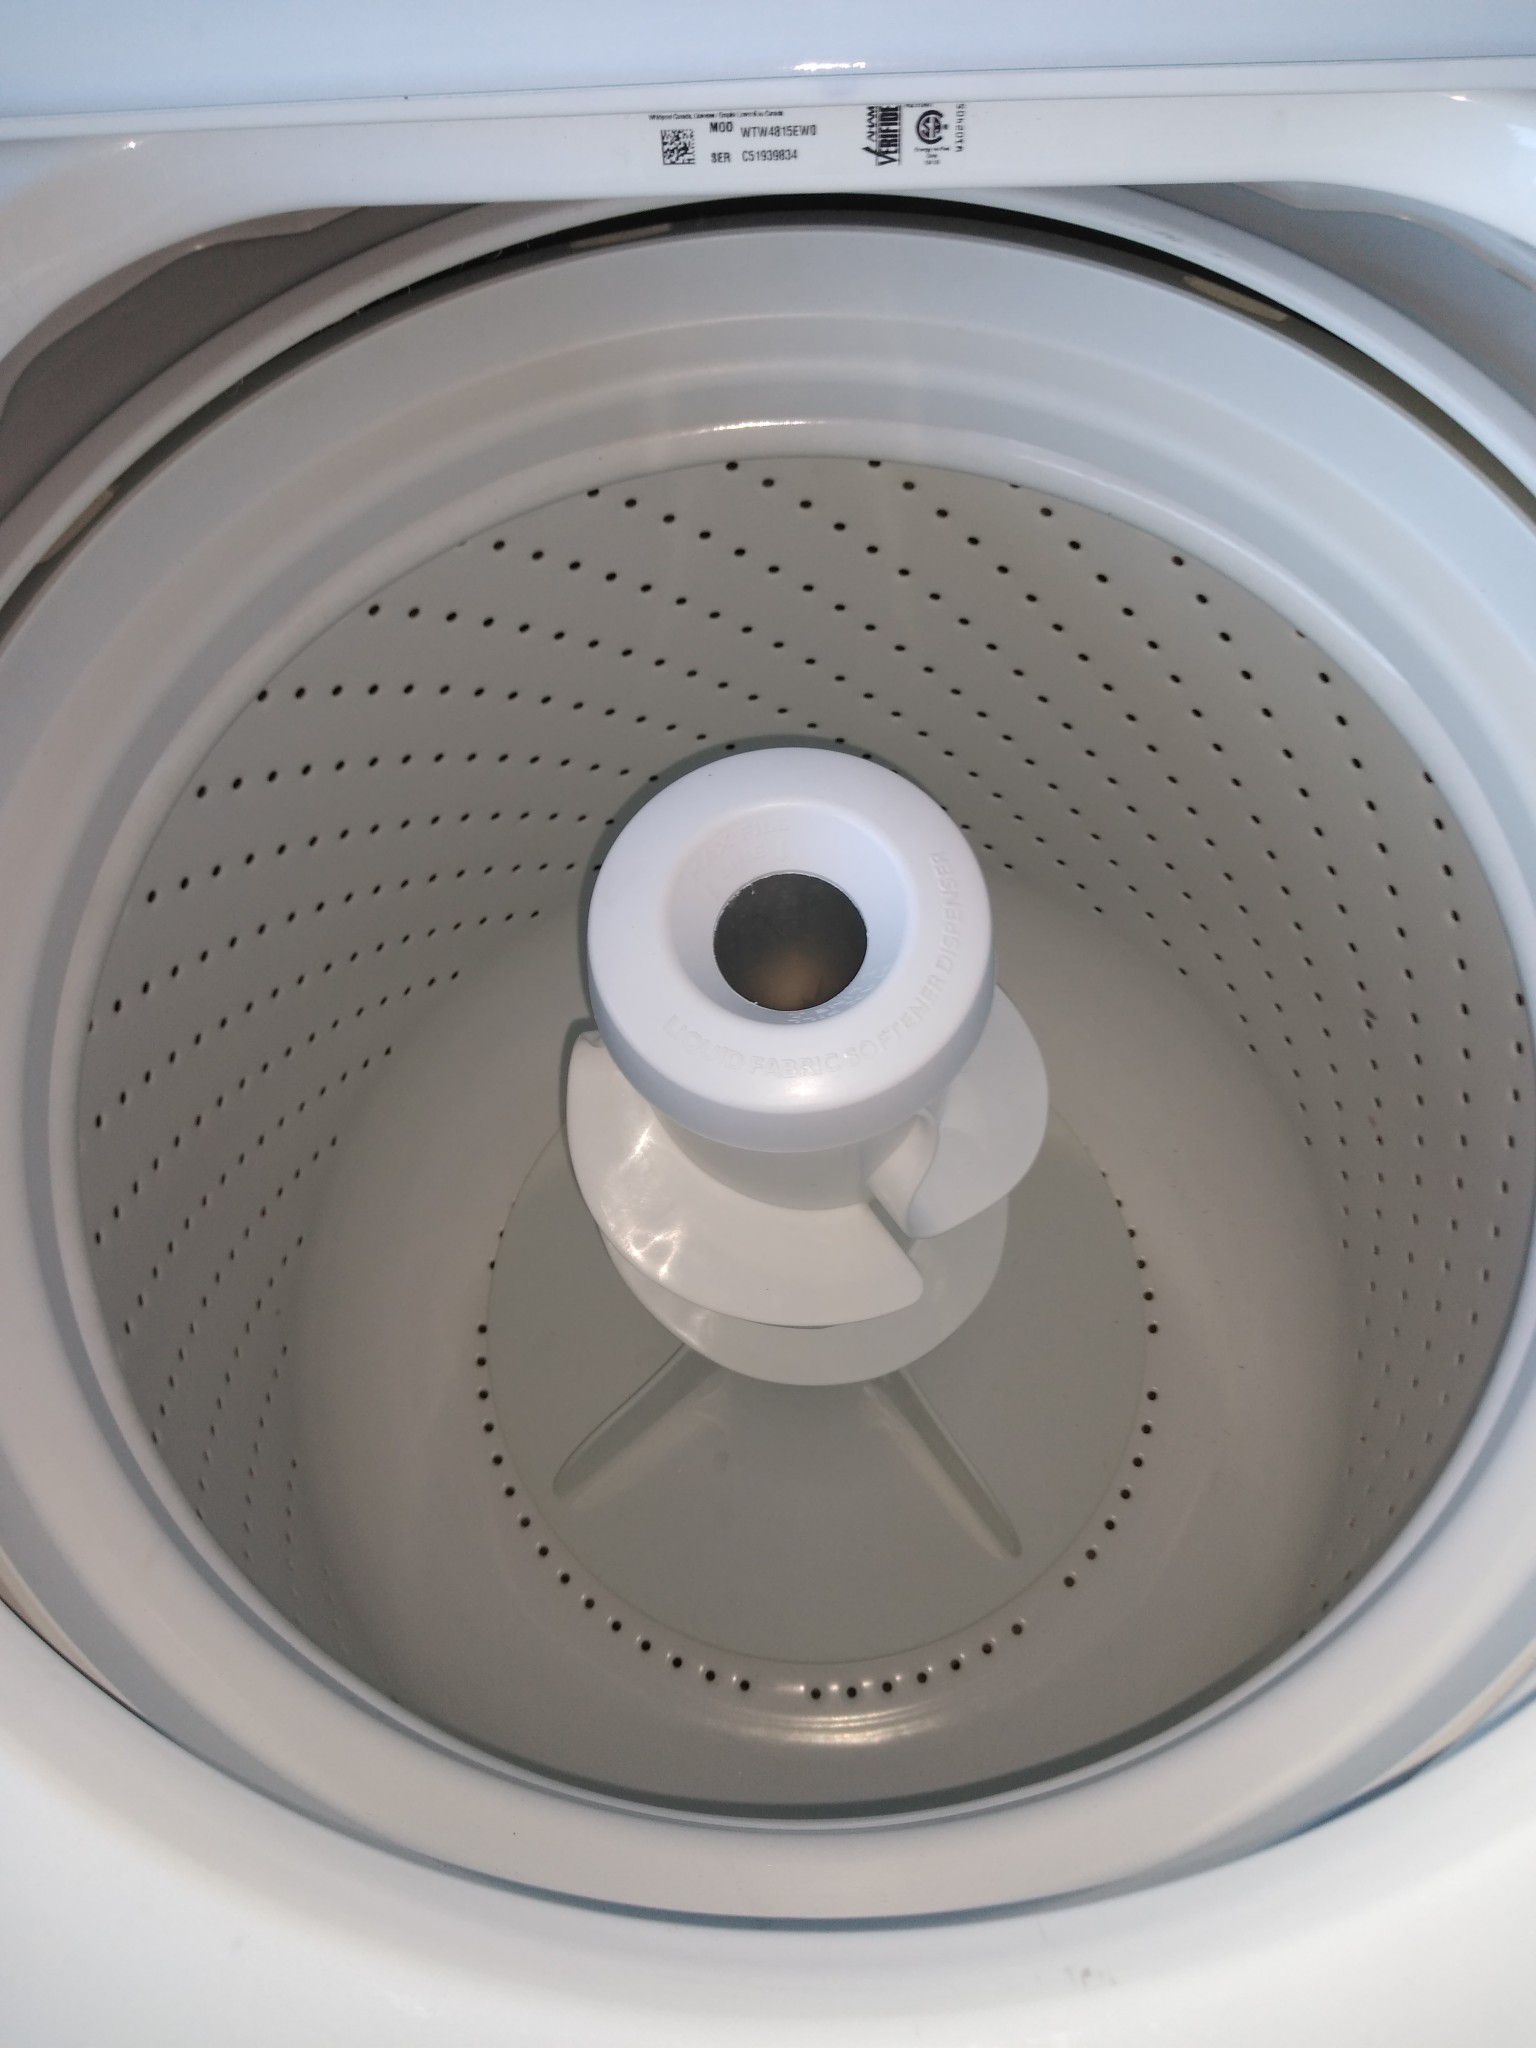 Whirlpool washer working great 30 days warranty free delivery and installation